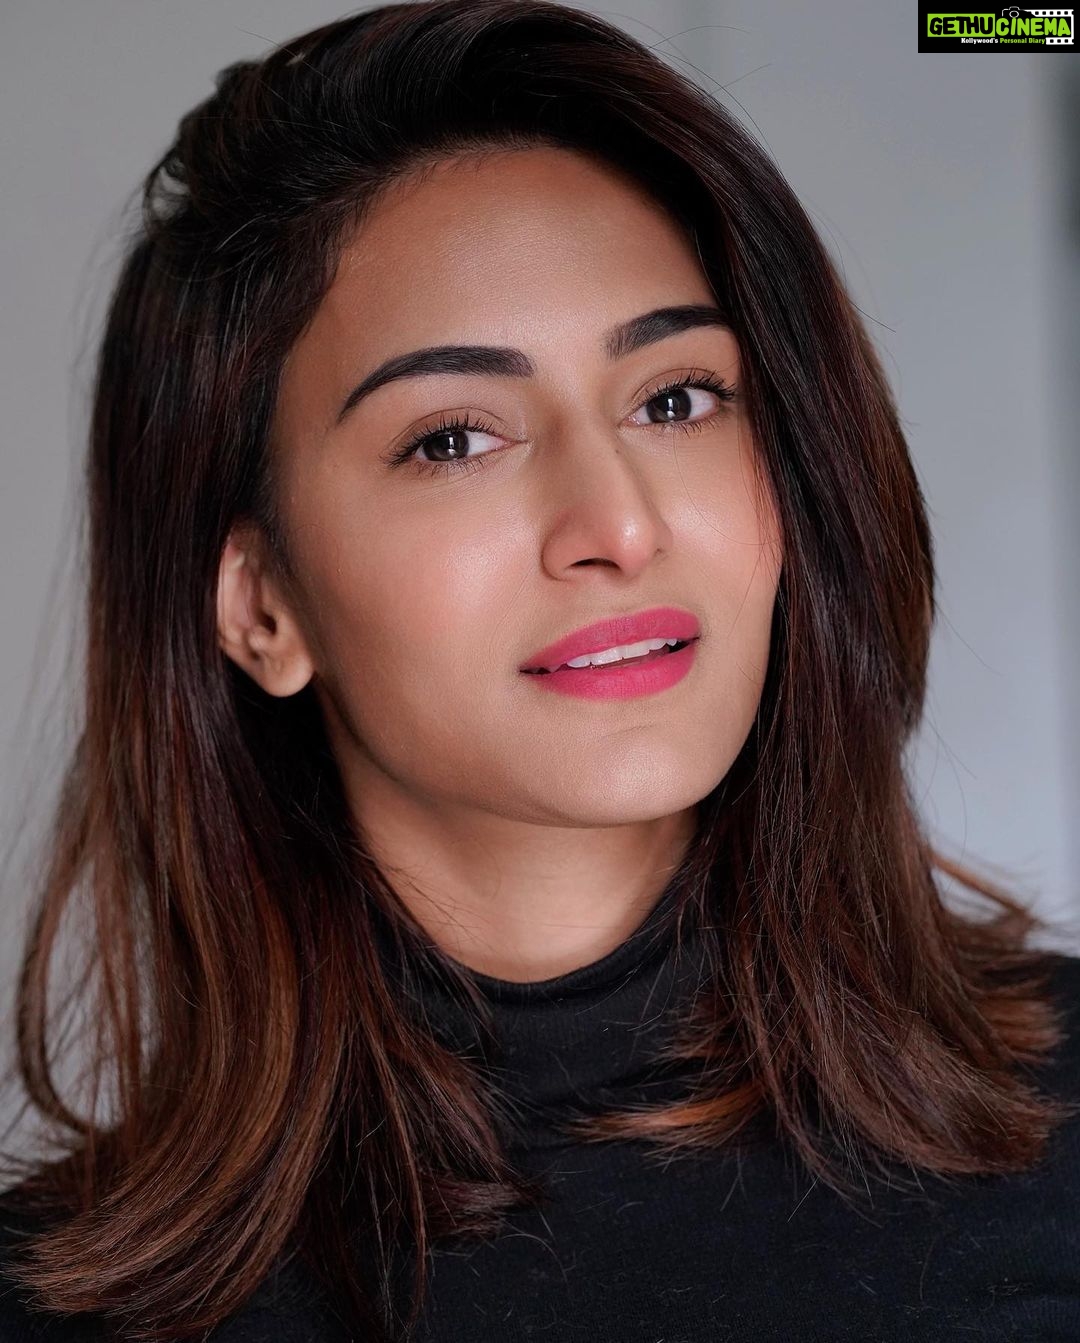 Erica Fernandes - 324.8K Likes - Most Liked Instagram Photos